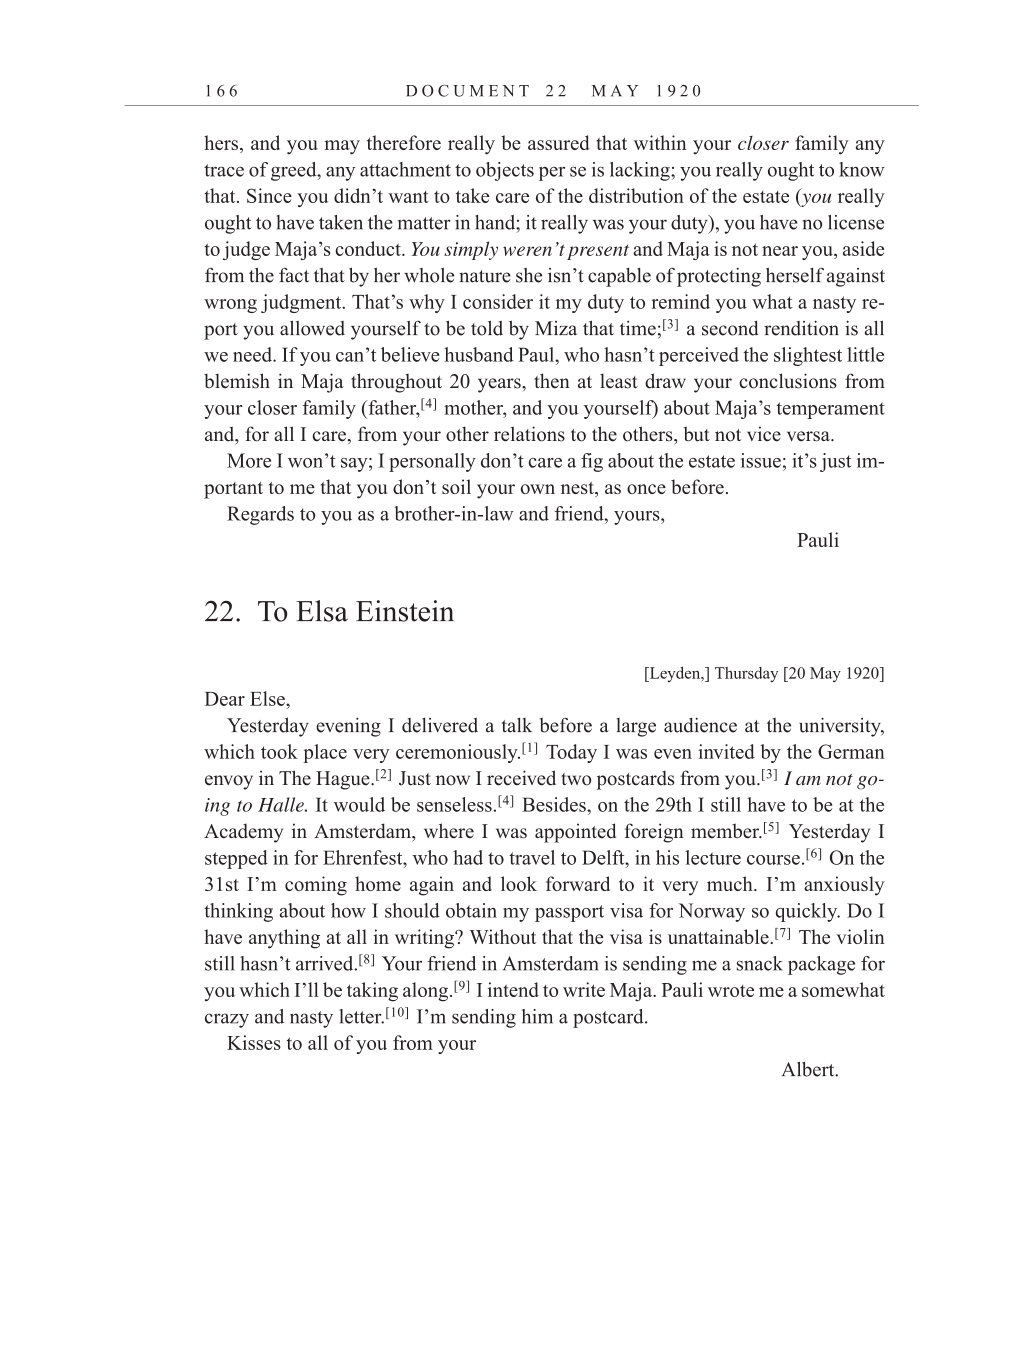 Volume 10: The Berlin Years: Correspondence, May-December 1920, and Supplementary Correspondence, 1909-1920 (English translation supplement) page 166